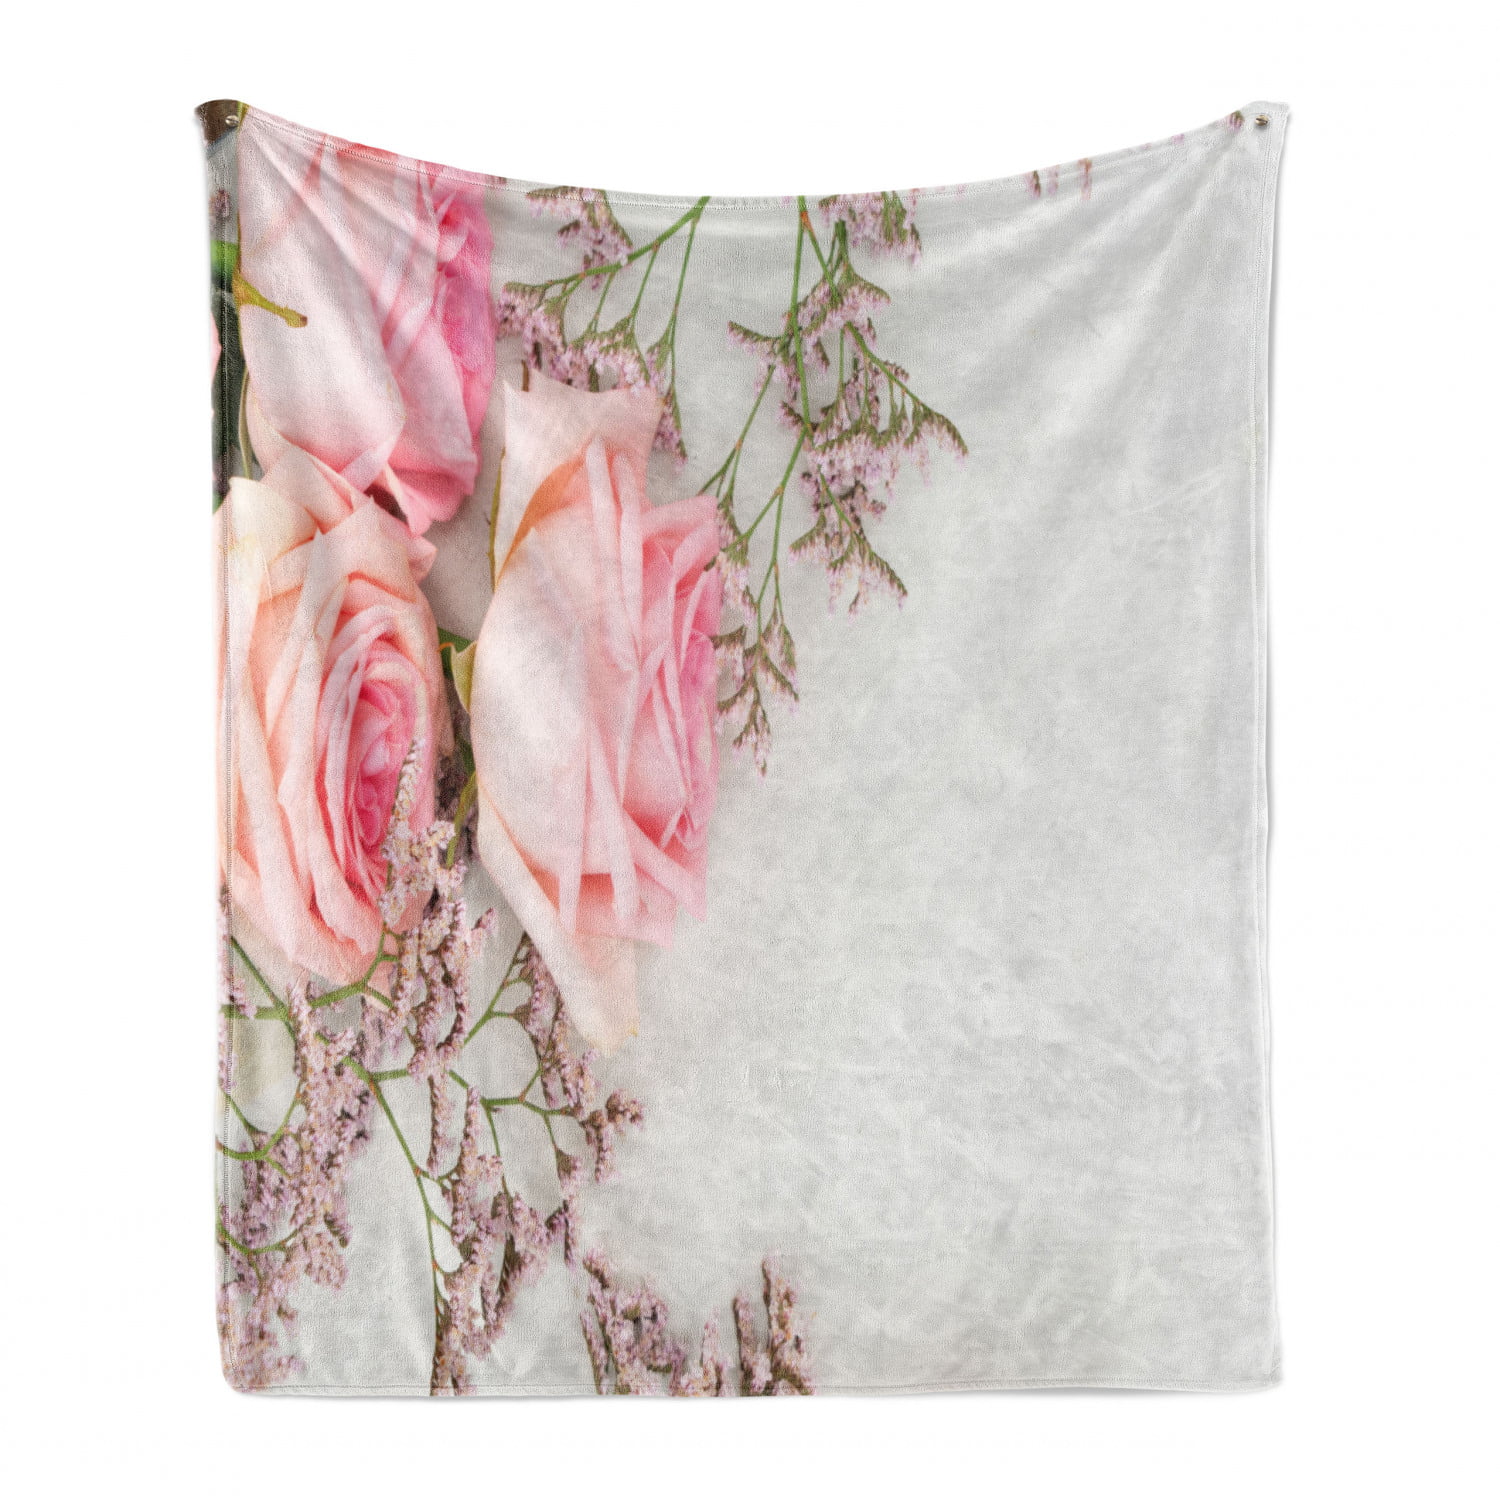 Overview Pattern of Romantic Roses Cozy Plush for Indoor and Outdoor Use Ambesonne Floral Soft Flannel Fleece Throw Blanket Mauve Seafoam 50 x 60 